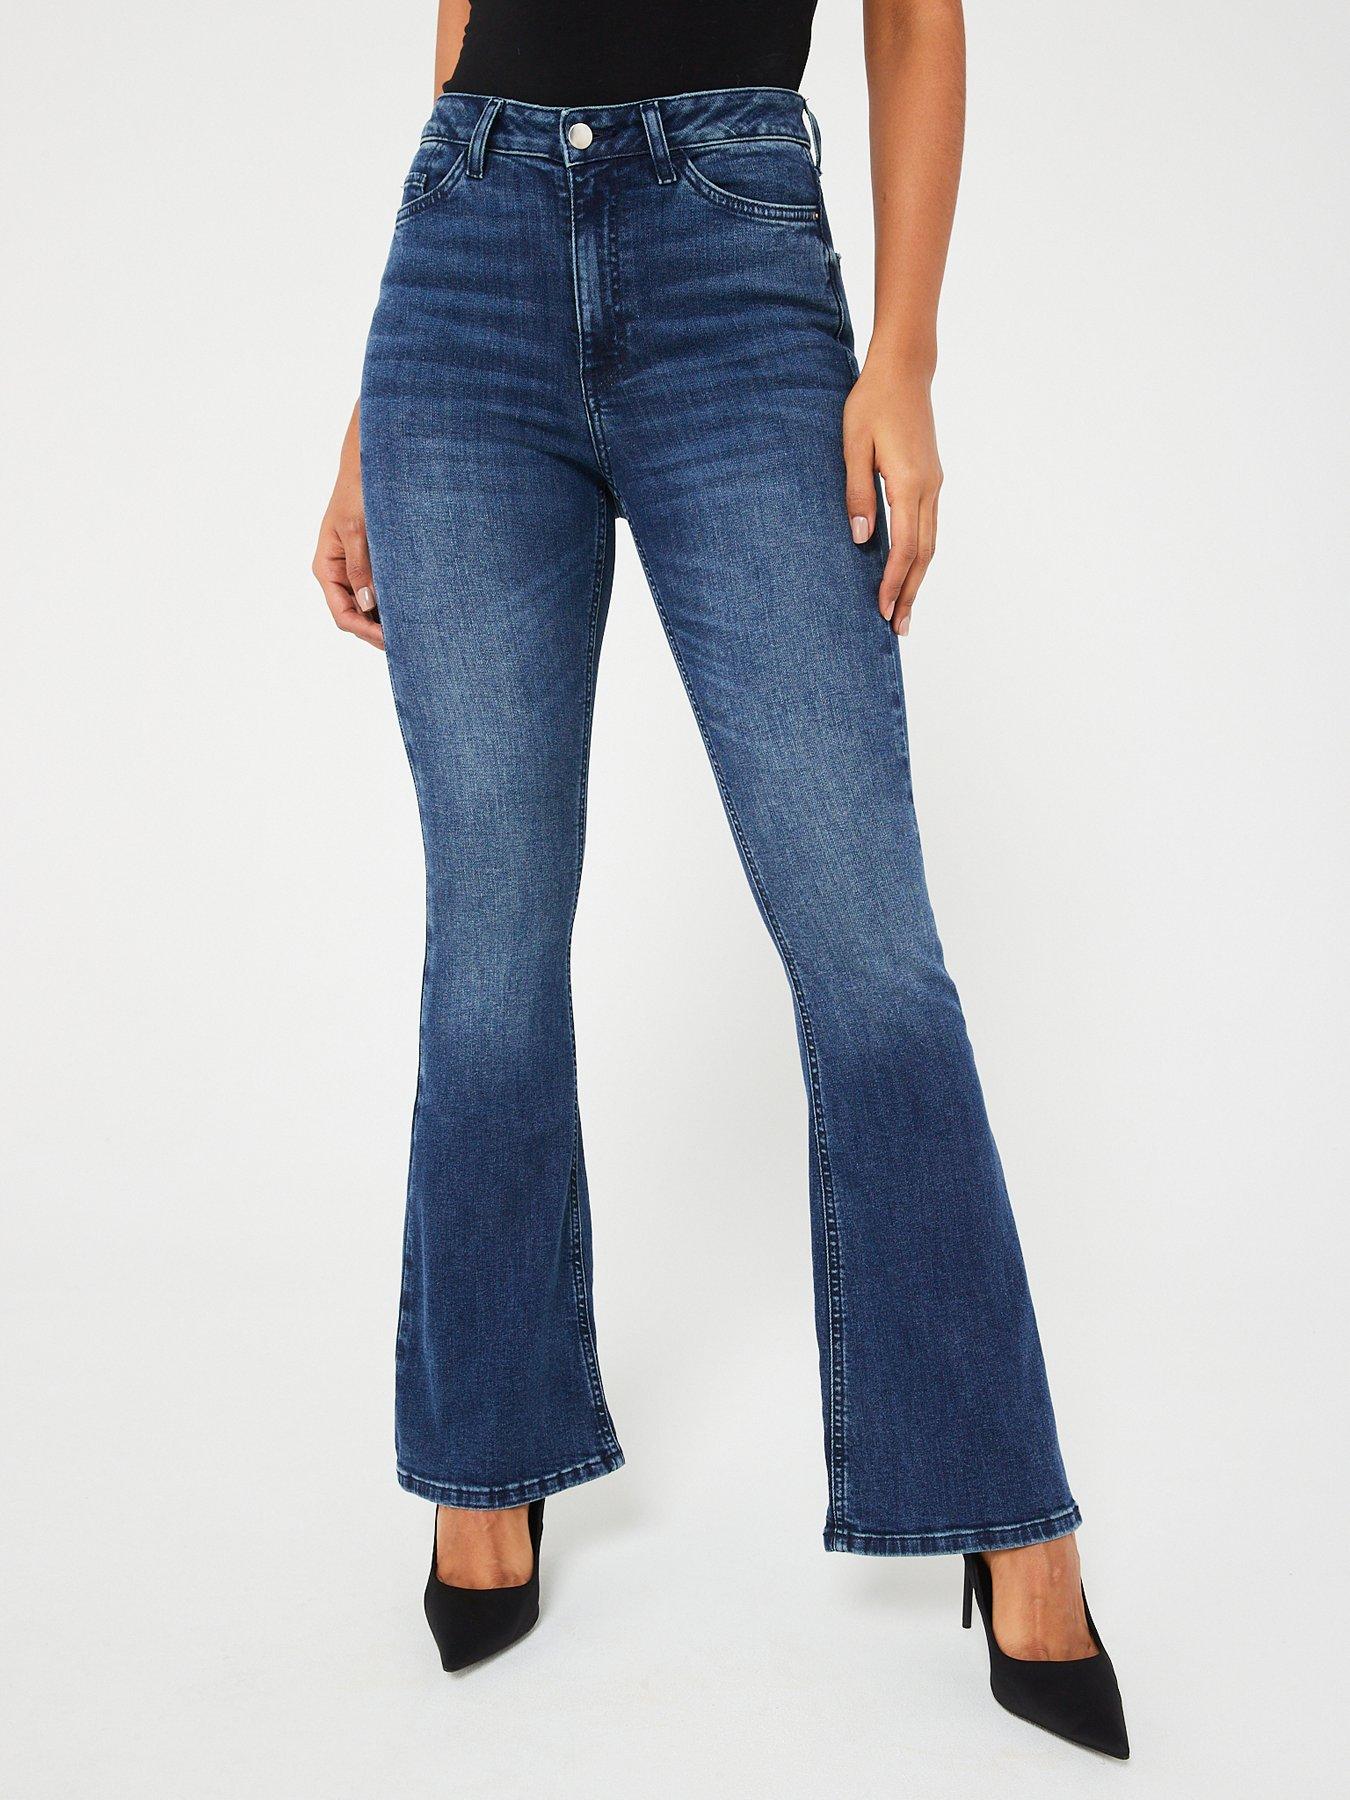 Petite Flare Jeans for Women - Up to 60% off